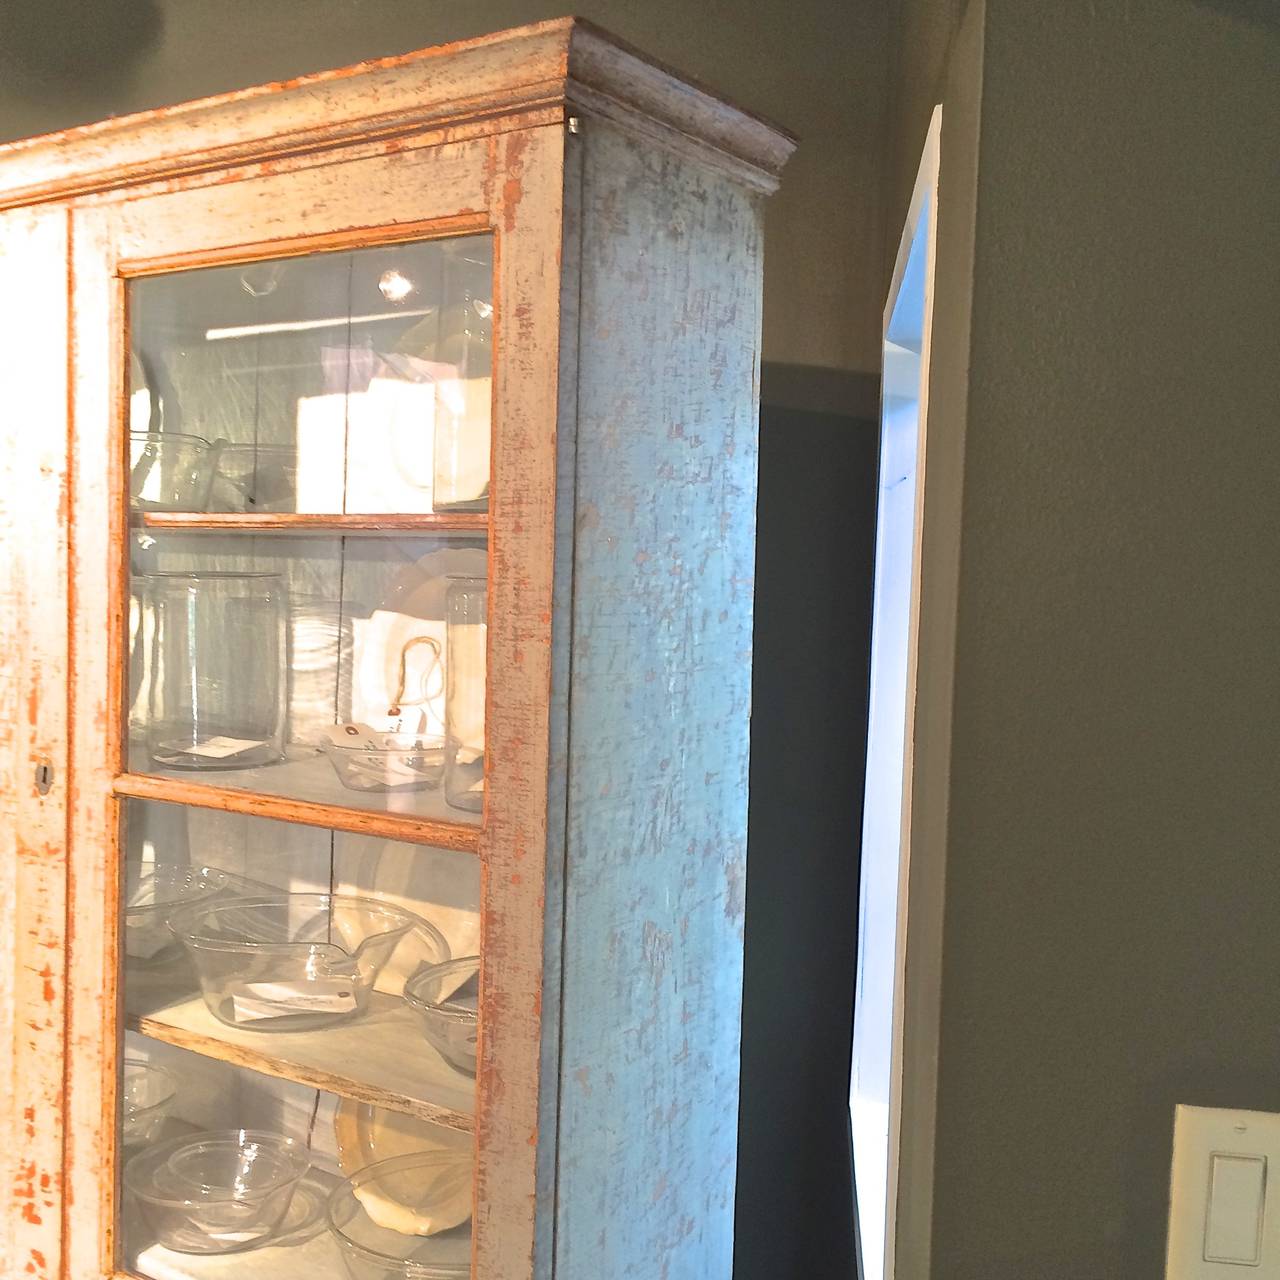 Handsome Swedish dry scraped glazed top cabinet. Upper cabinet with shelves and two hidden drawers. Very narrow. Bottom left has a crack in the glass.